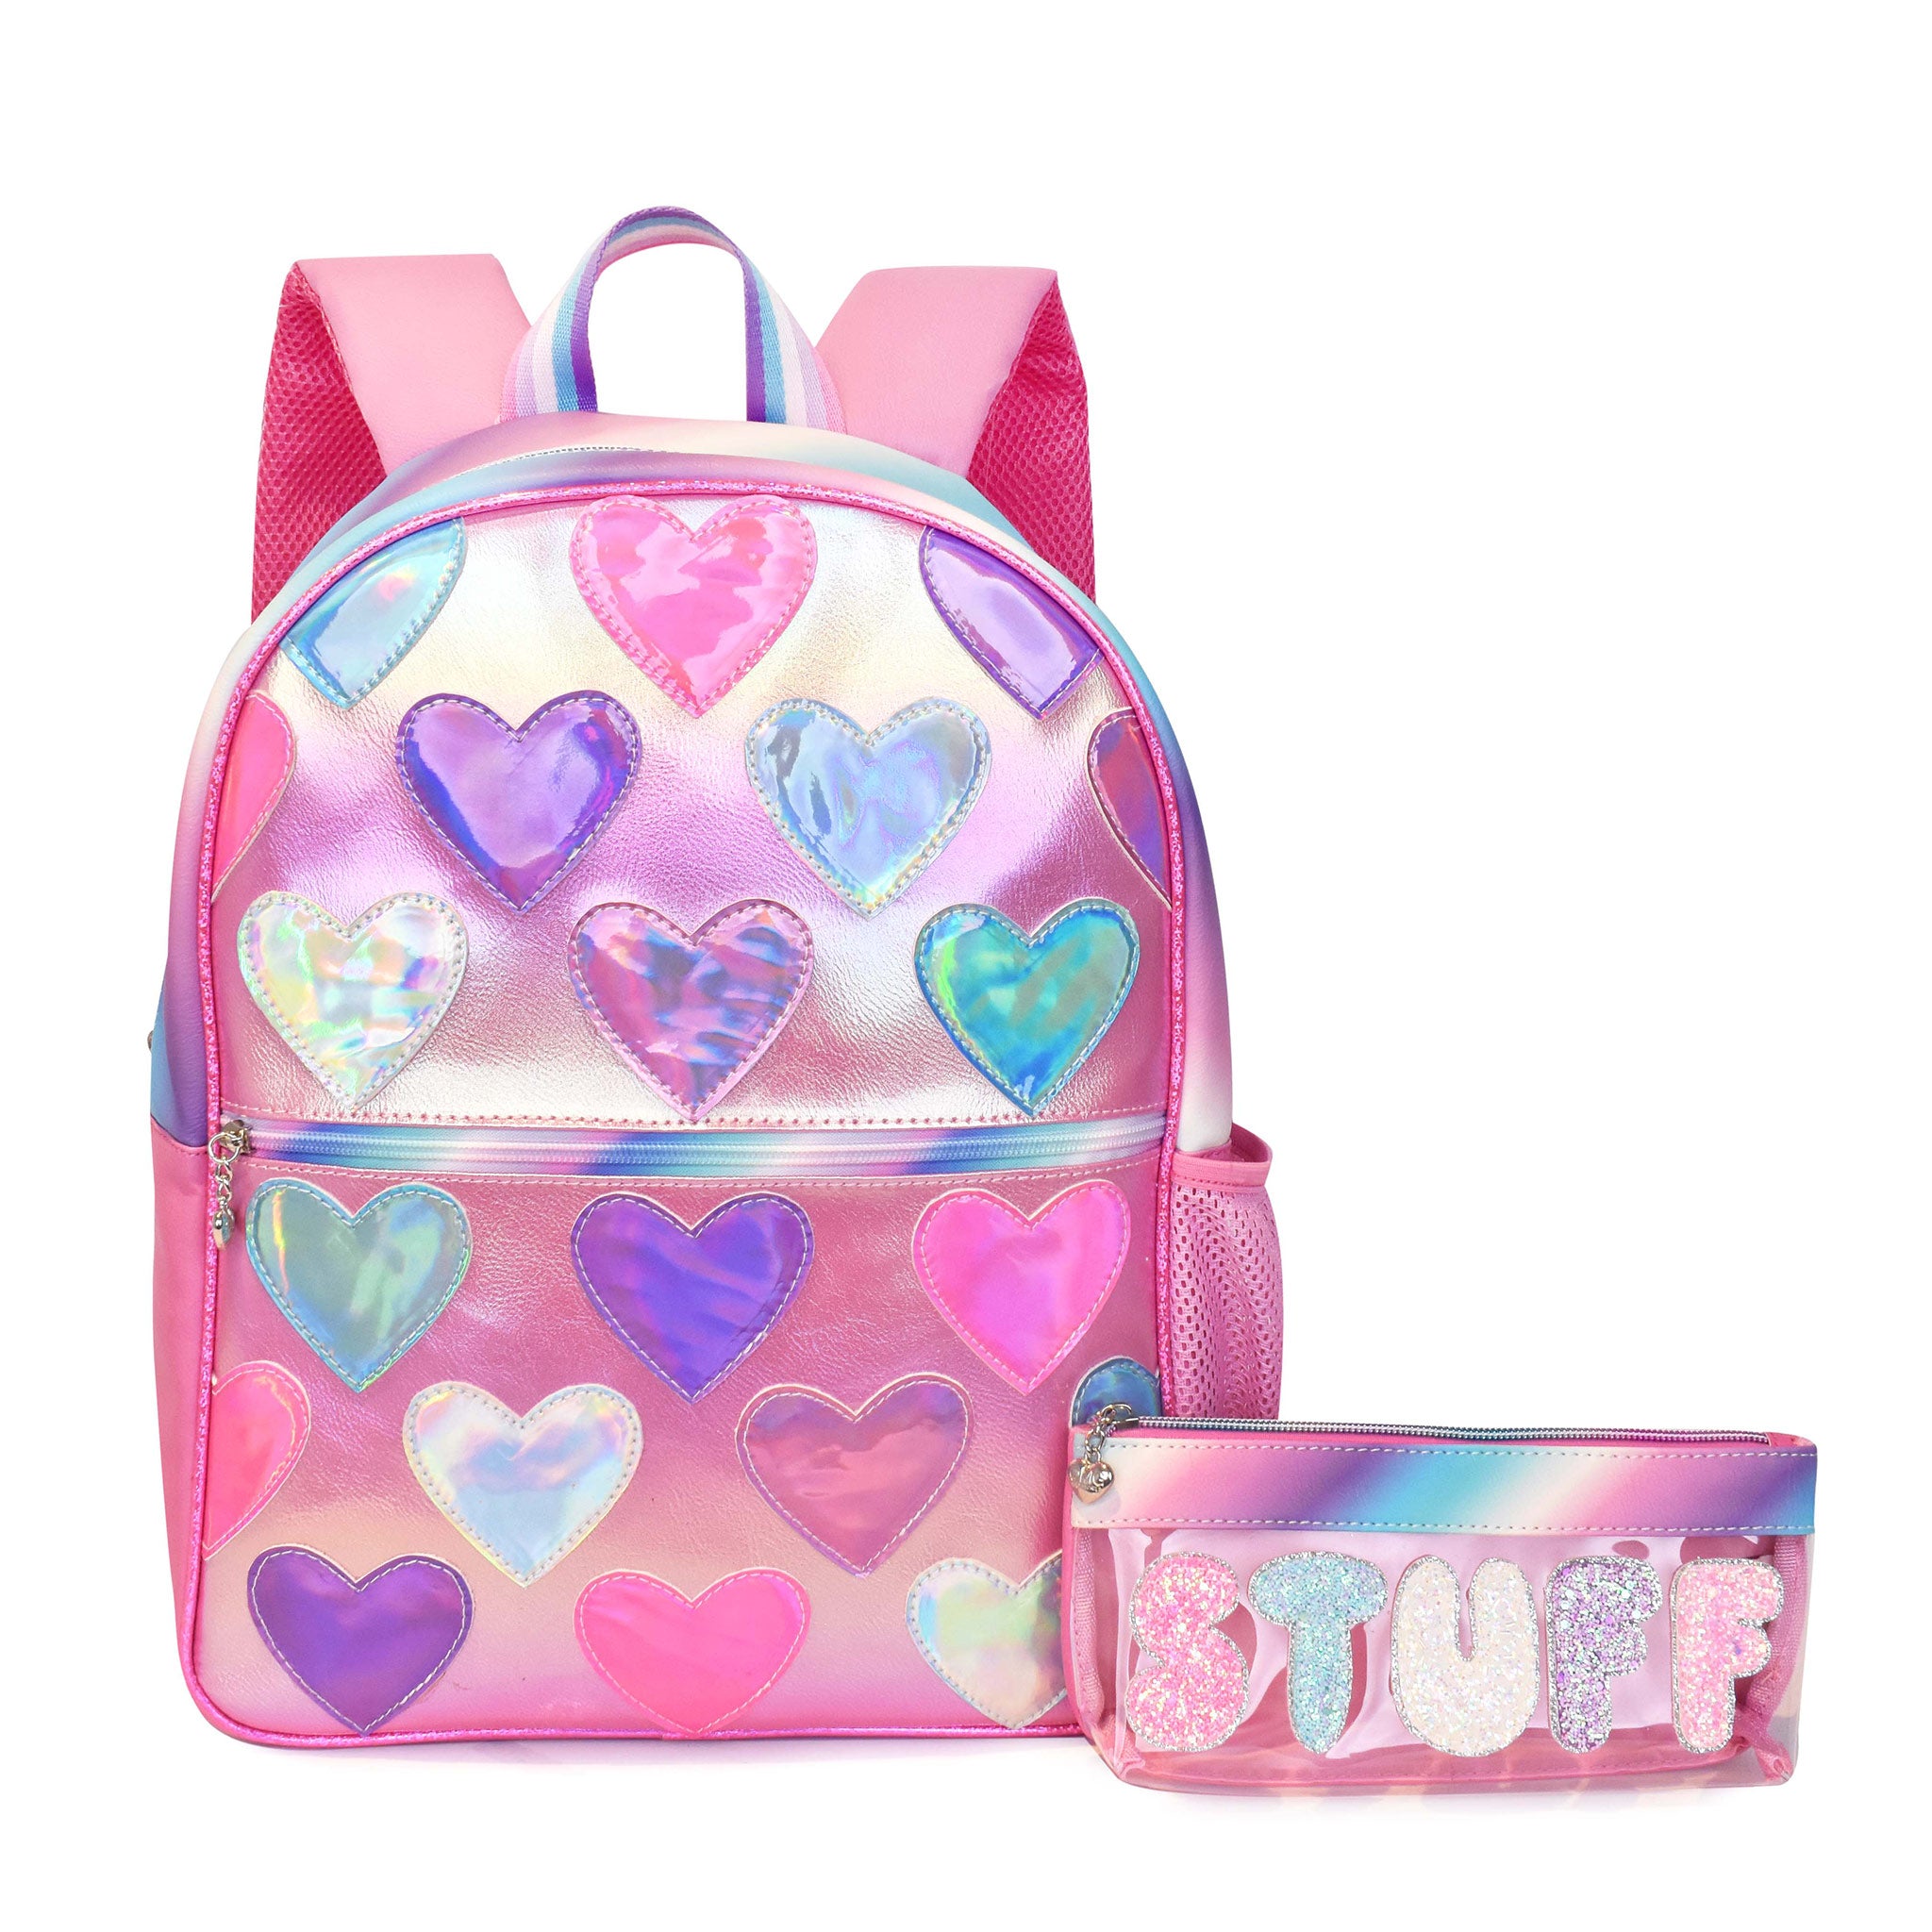 Front view of a metallic heart-patched large backpack with a clear pencil case with glitter bubble letters 'STUFF' 